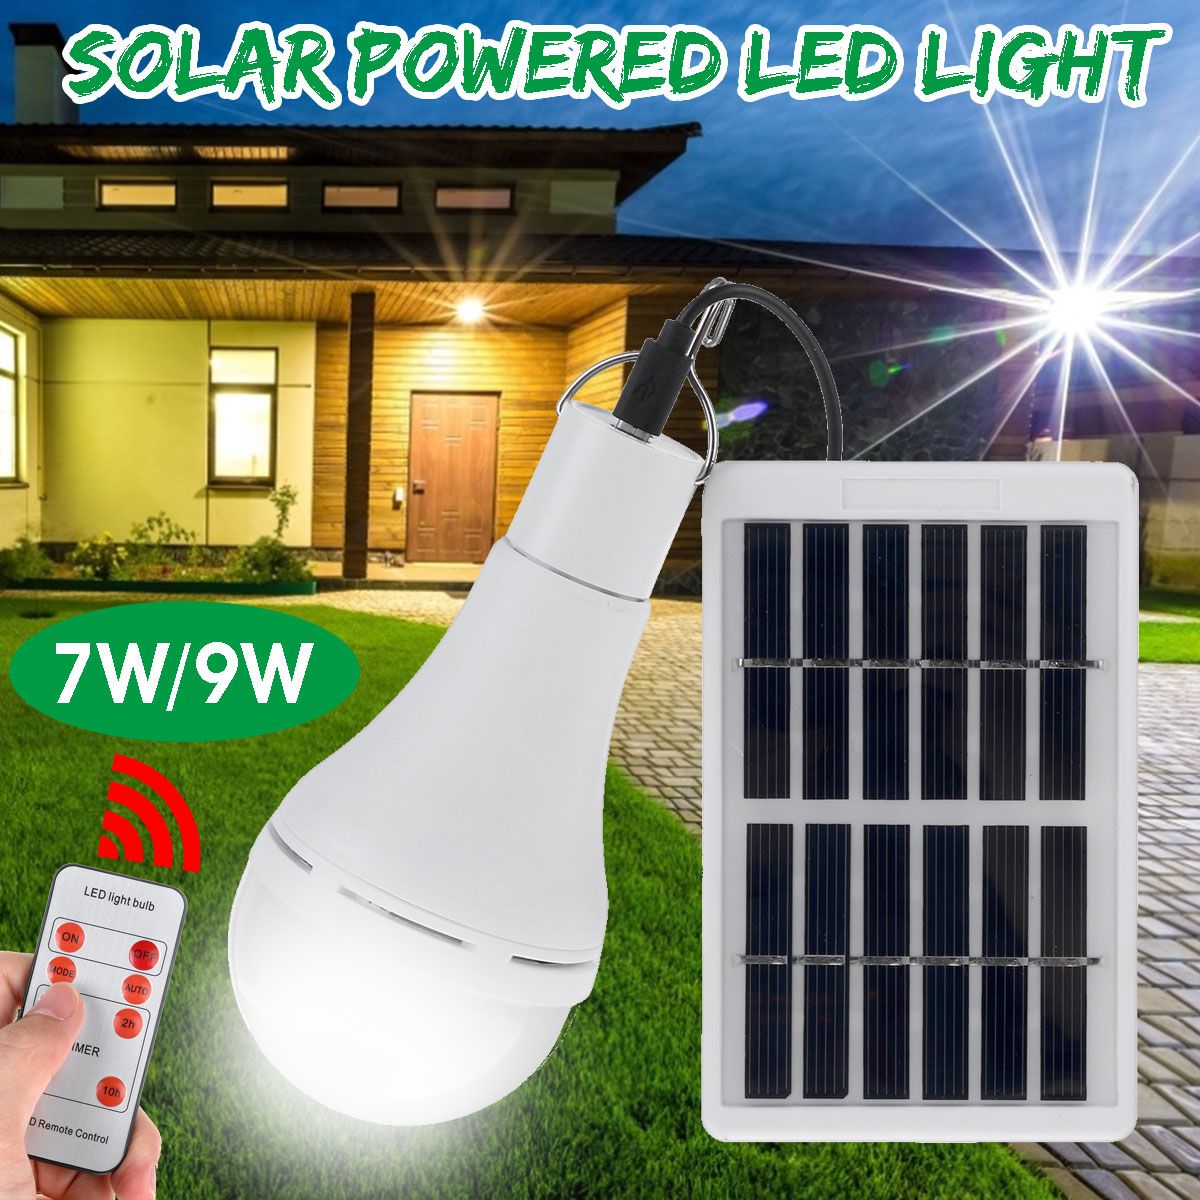 Portable-Solar-Powered-LED-Light-Bulb-Remote-Control-7W-9W-Hang-Up-Lamp-Camping-1724061